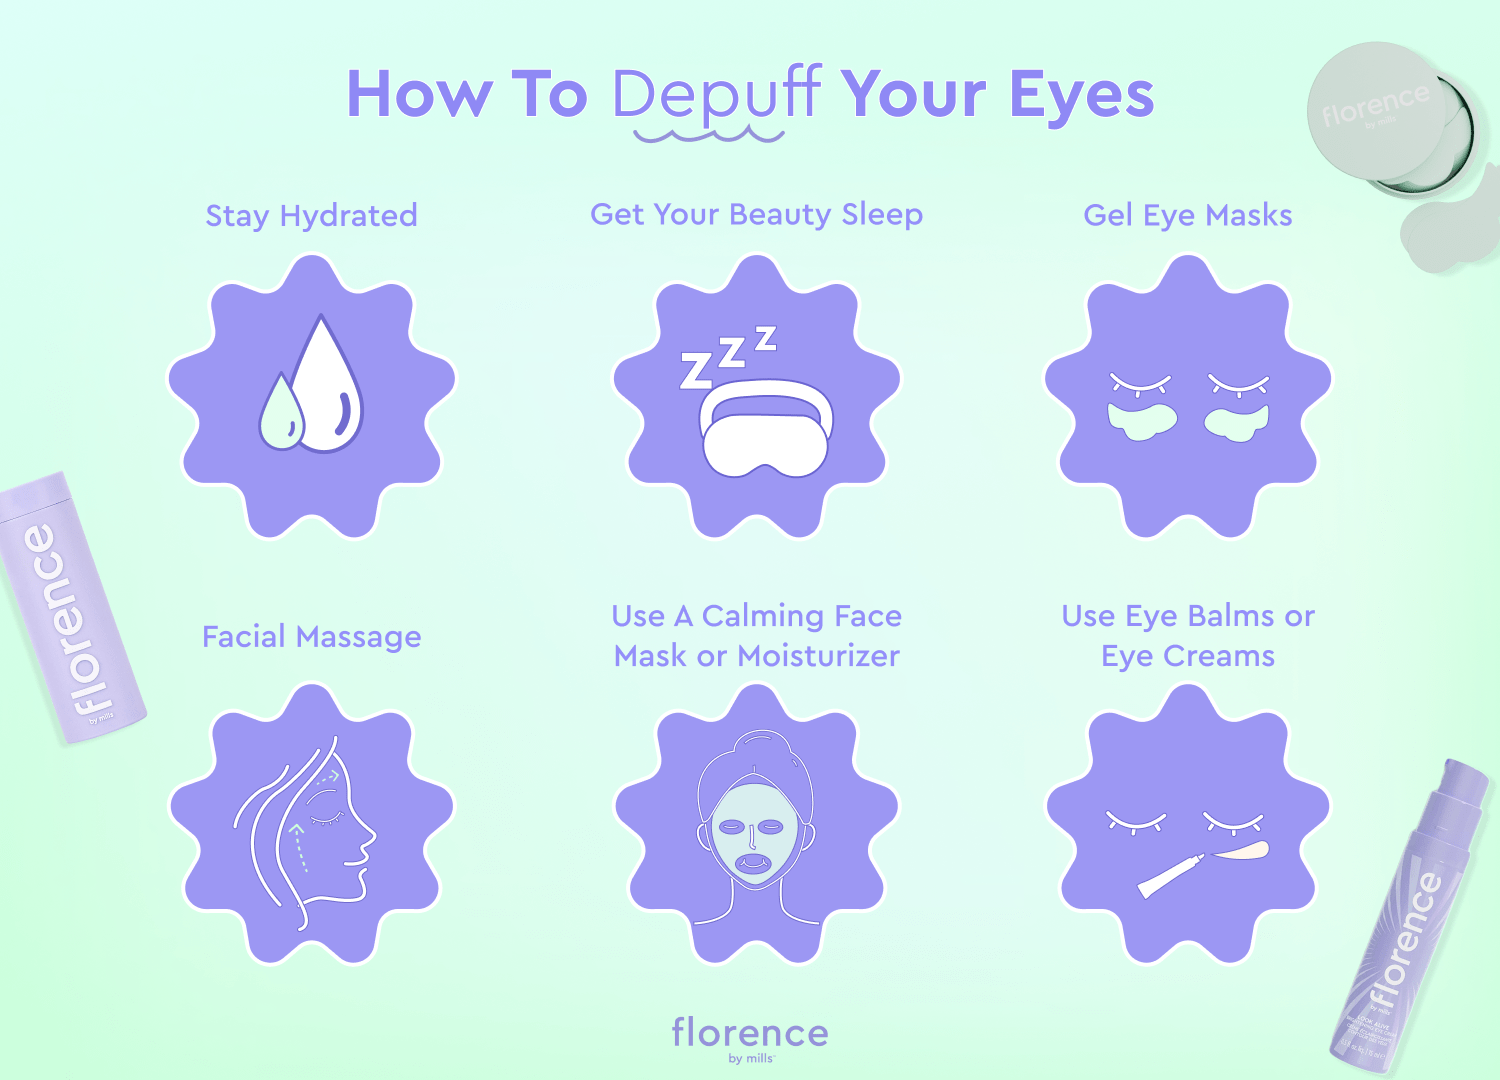 How to depuff your eyes by florence by mills